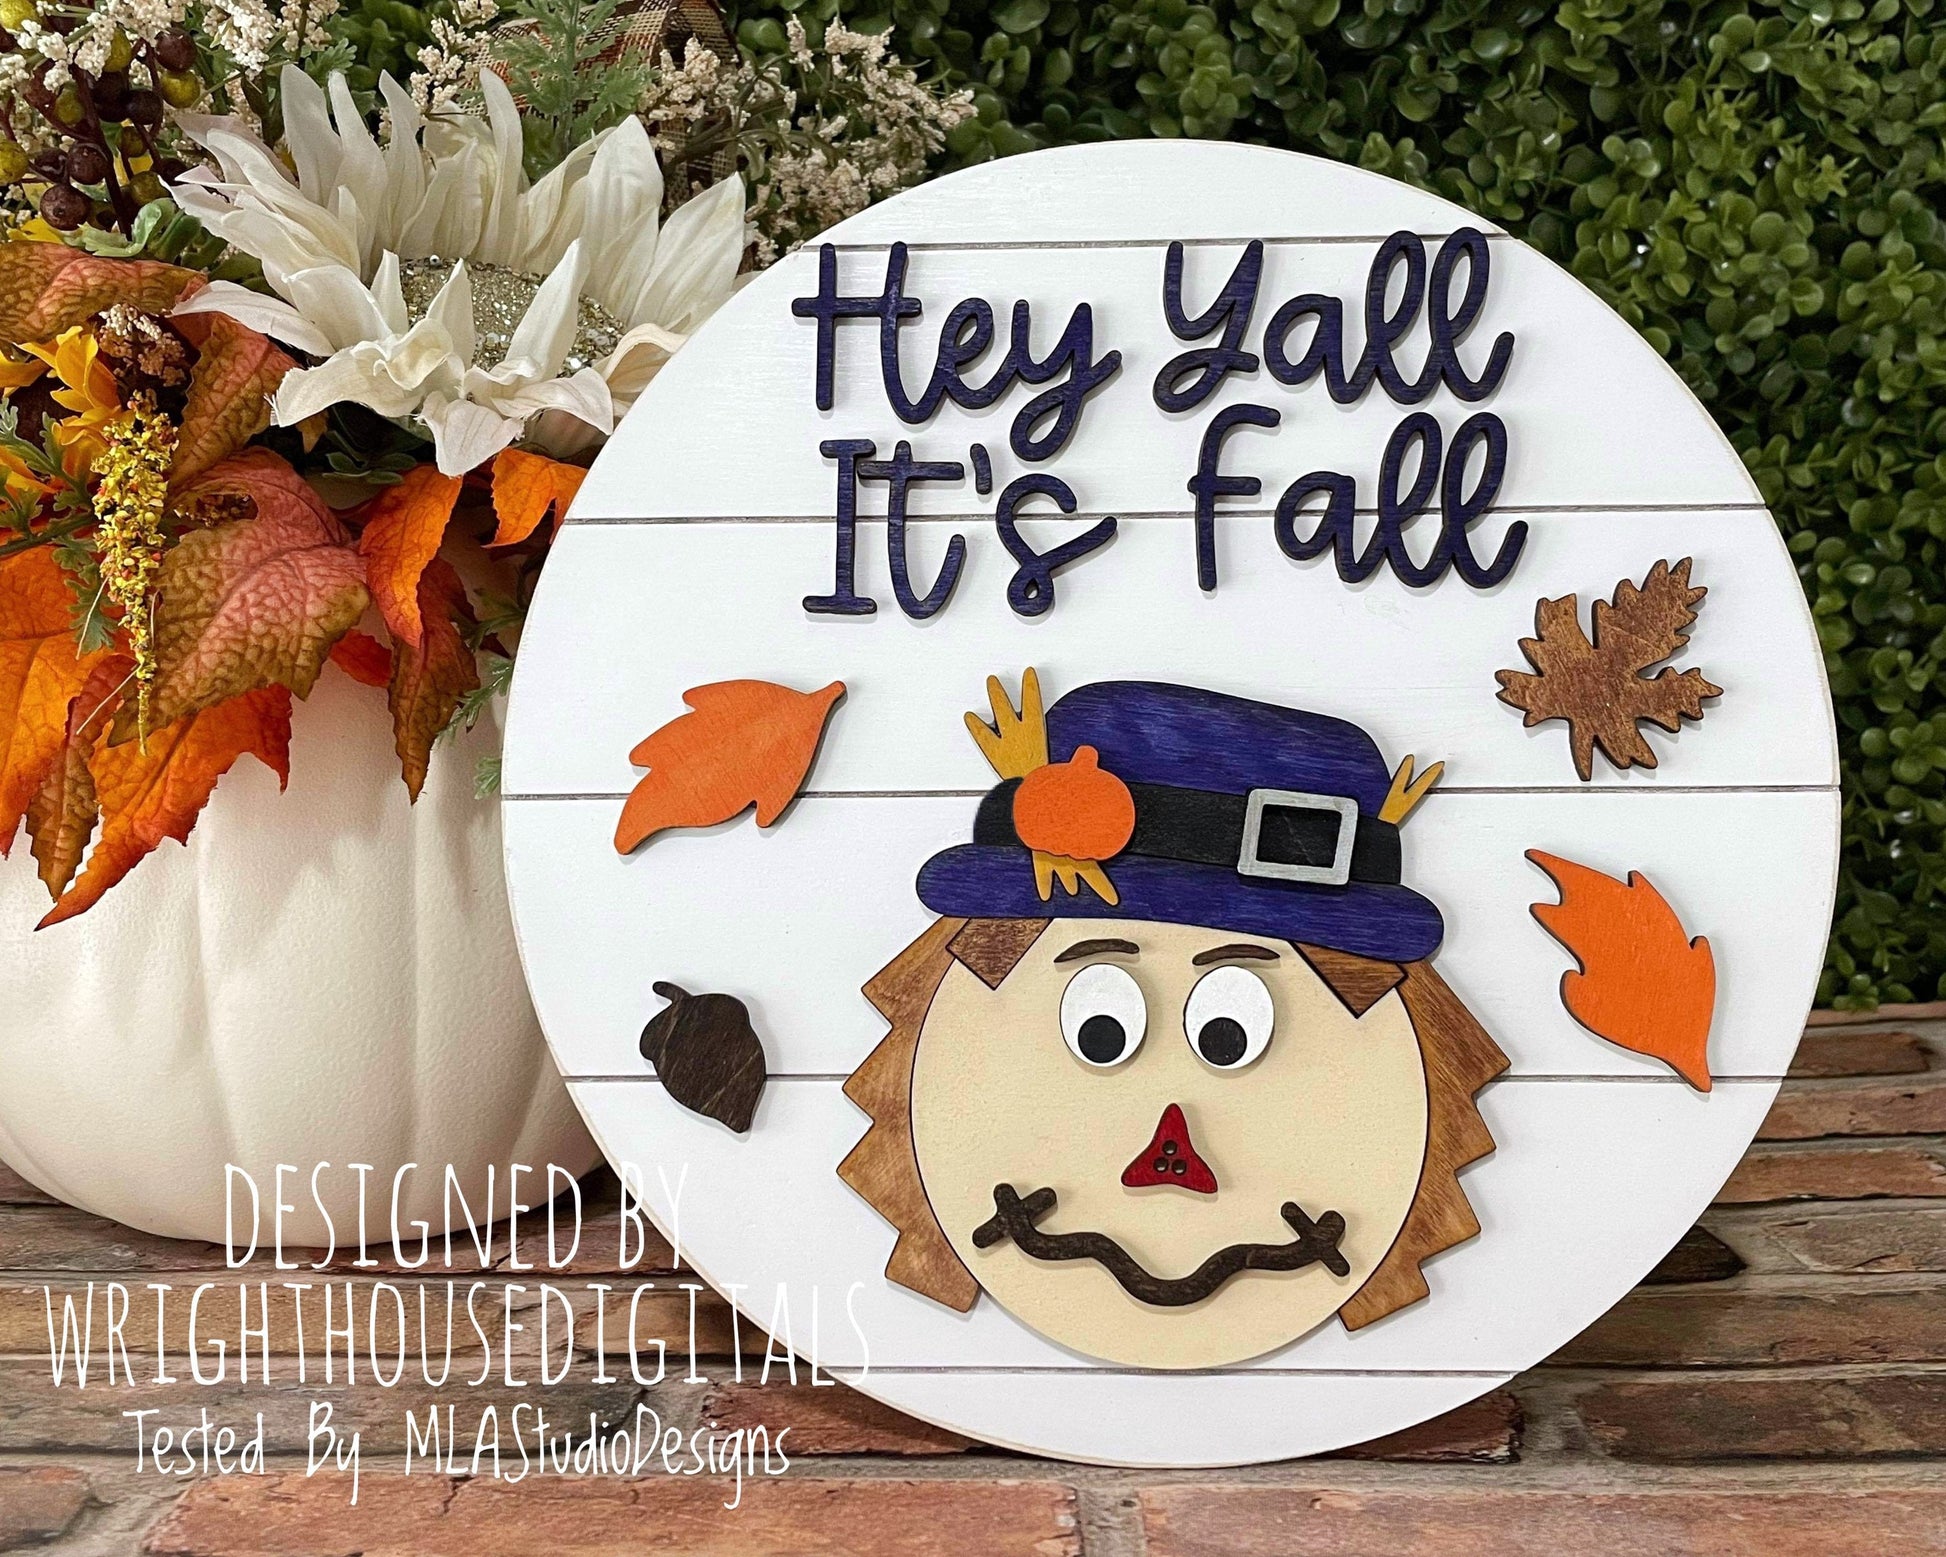 Hey Y'all It's Fall Scarecrow Autumn Door Hanger Round - Seasonal Sign Making and DIY Kits - Cut File For Glowforge Laser - Digital SVG File